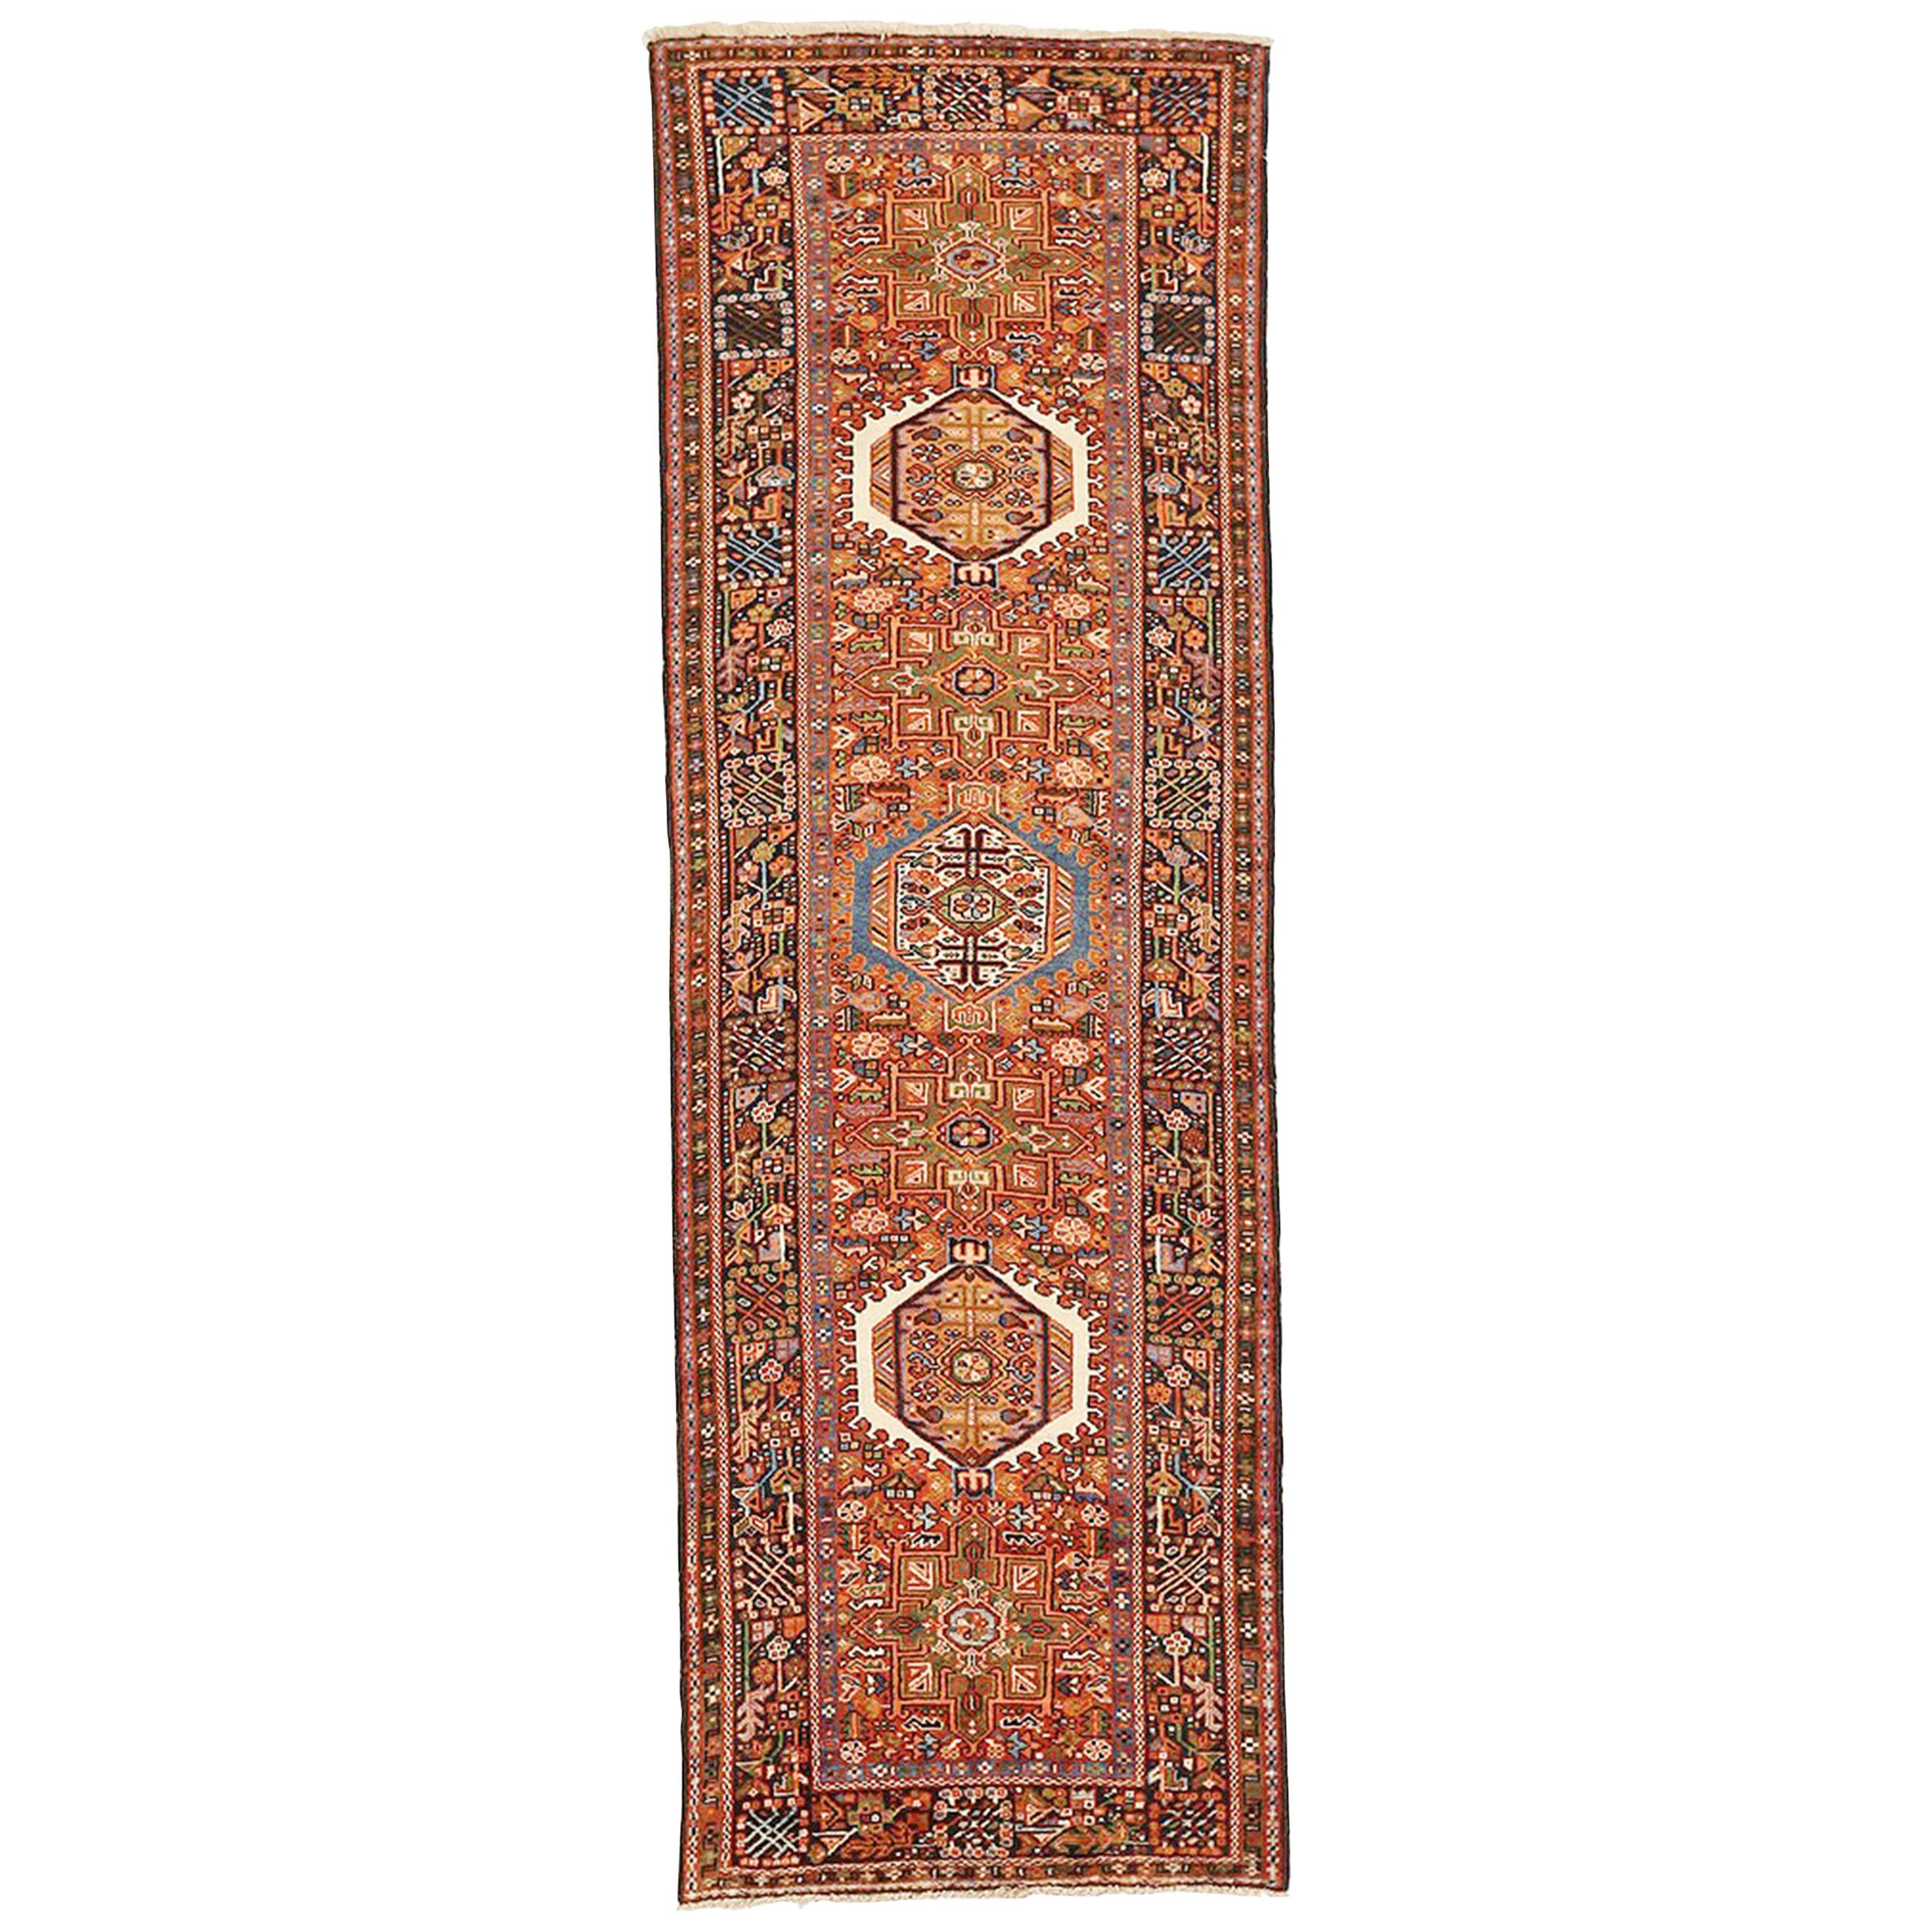 Antique Persian Heriz Runner Rug with Blue and White Medallions on Center Field